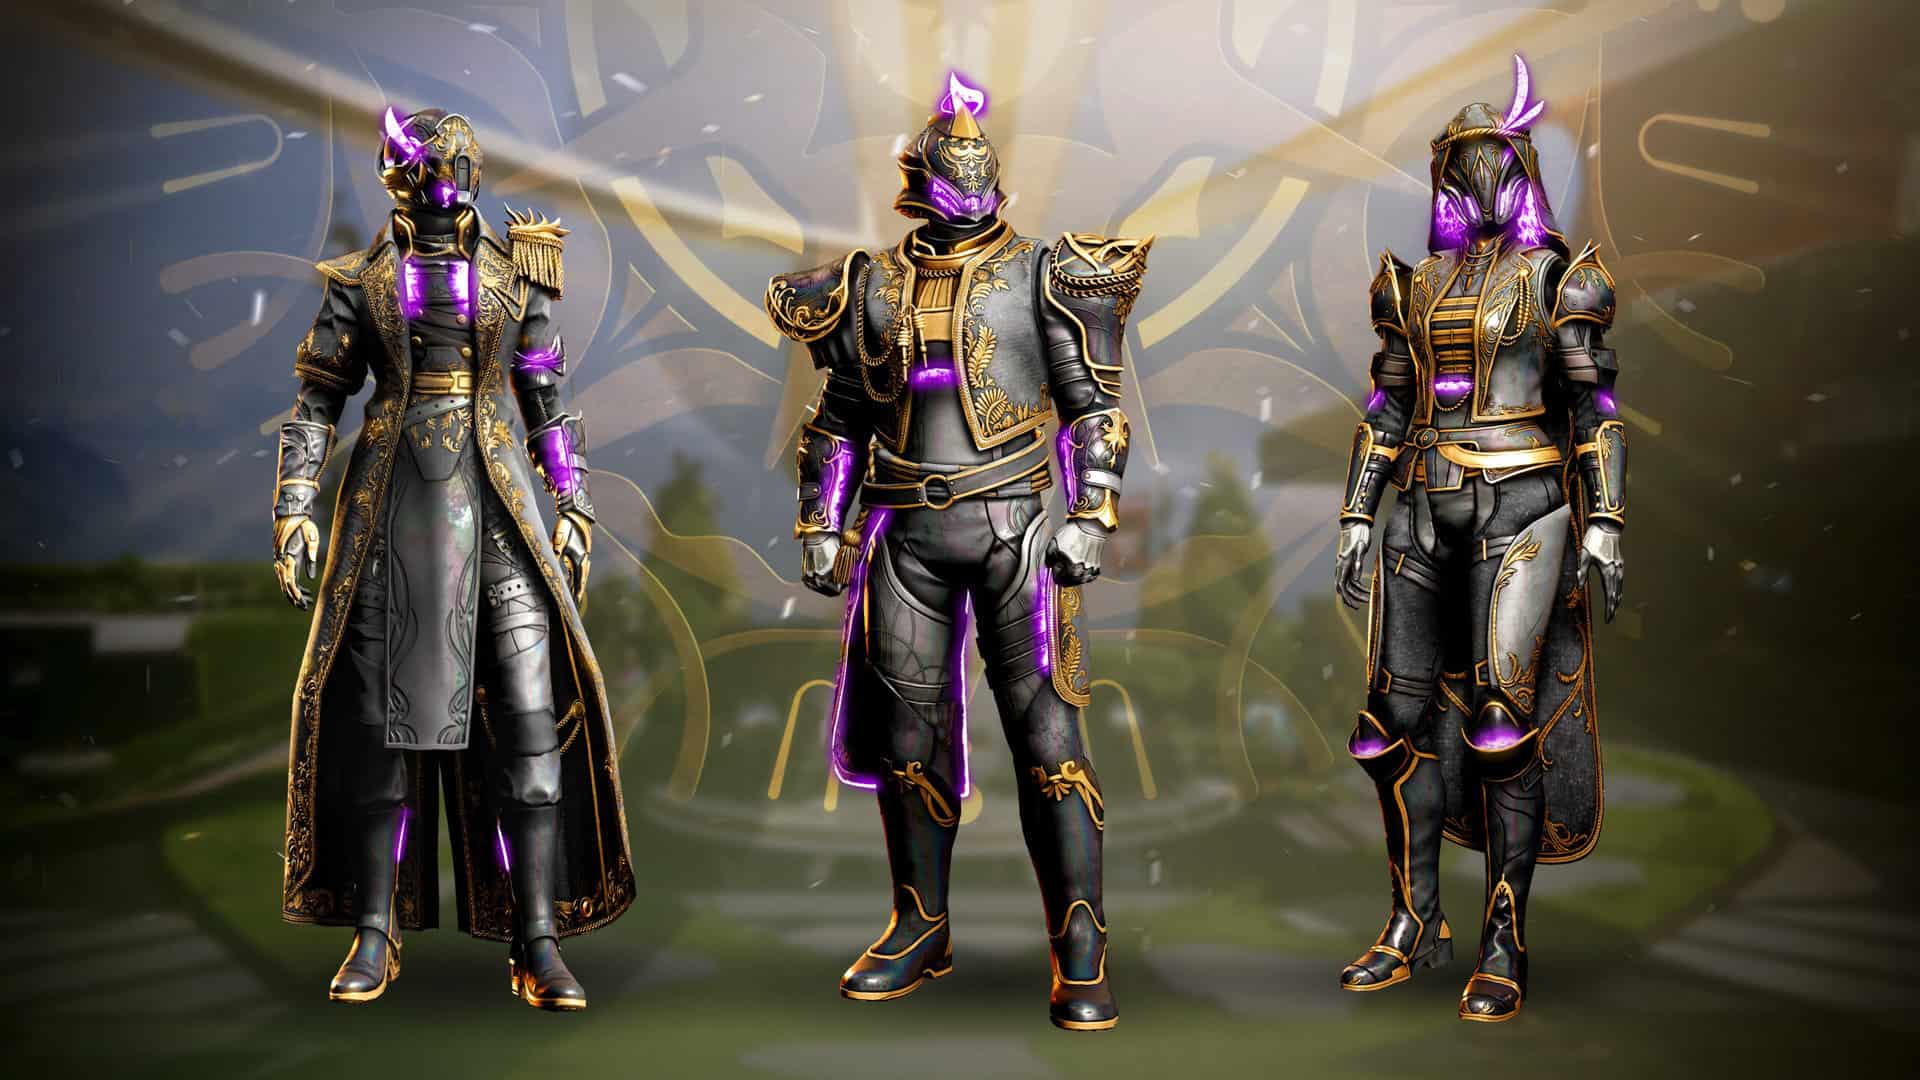 Solstice armor sets featured